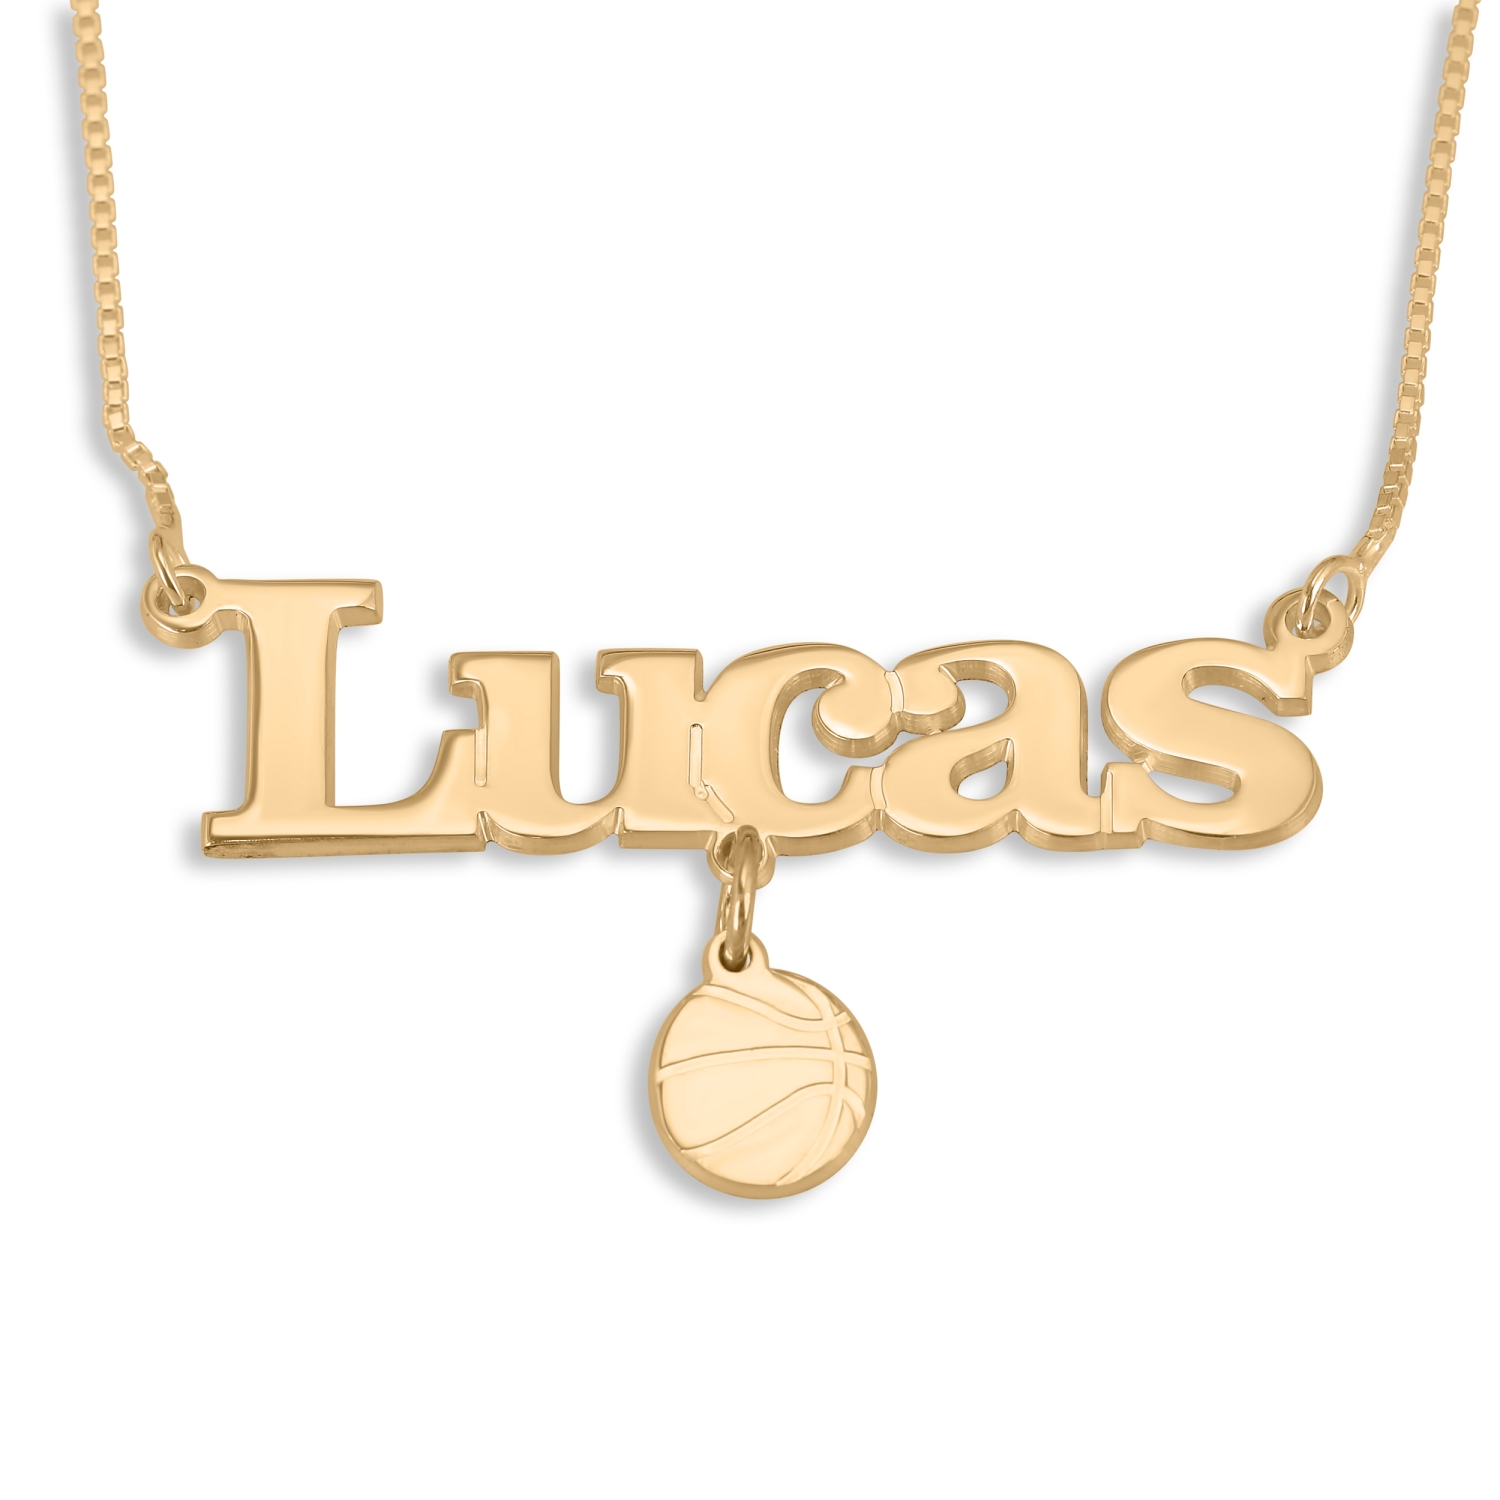 Basketball Name Necklace, 24K Gold Plated Charm - 1